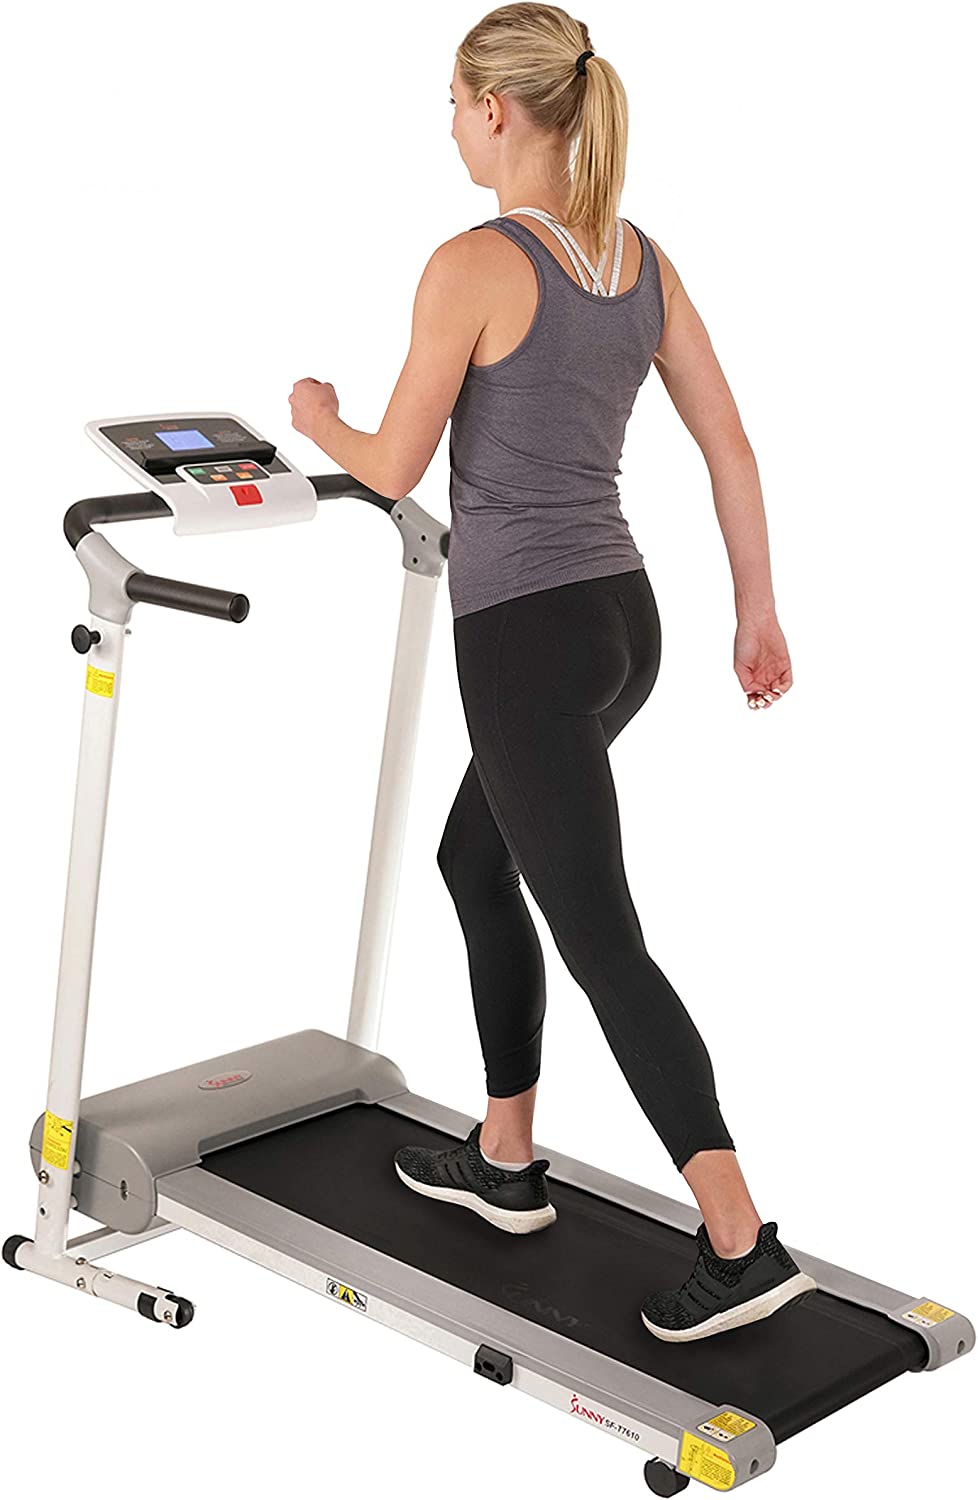 Review of Sunny Health & Fitness SF-T7610 Electric Walking Folding Treadmill